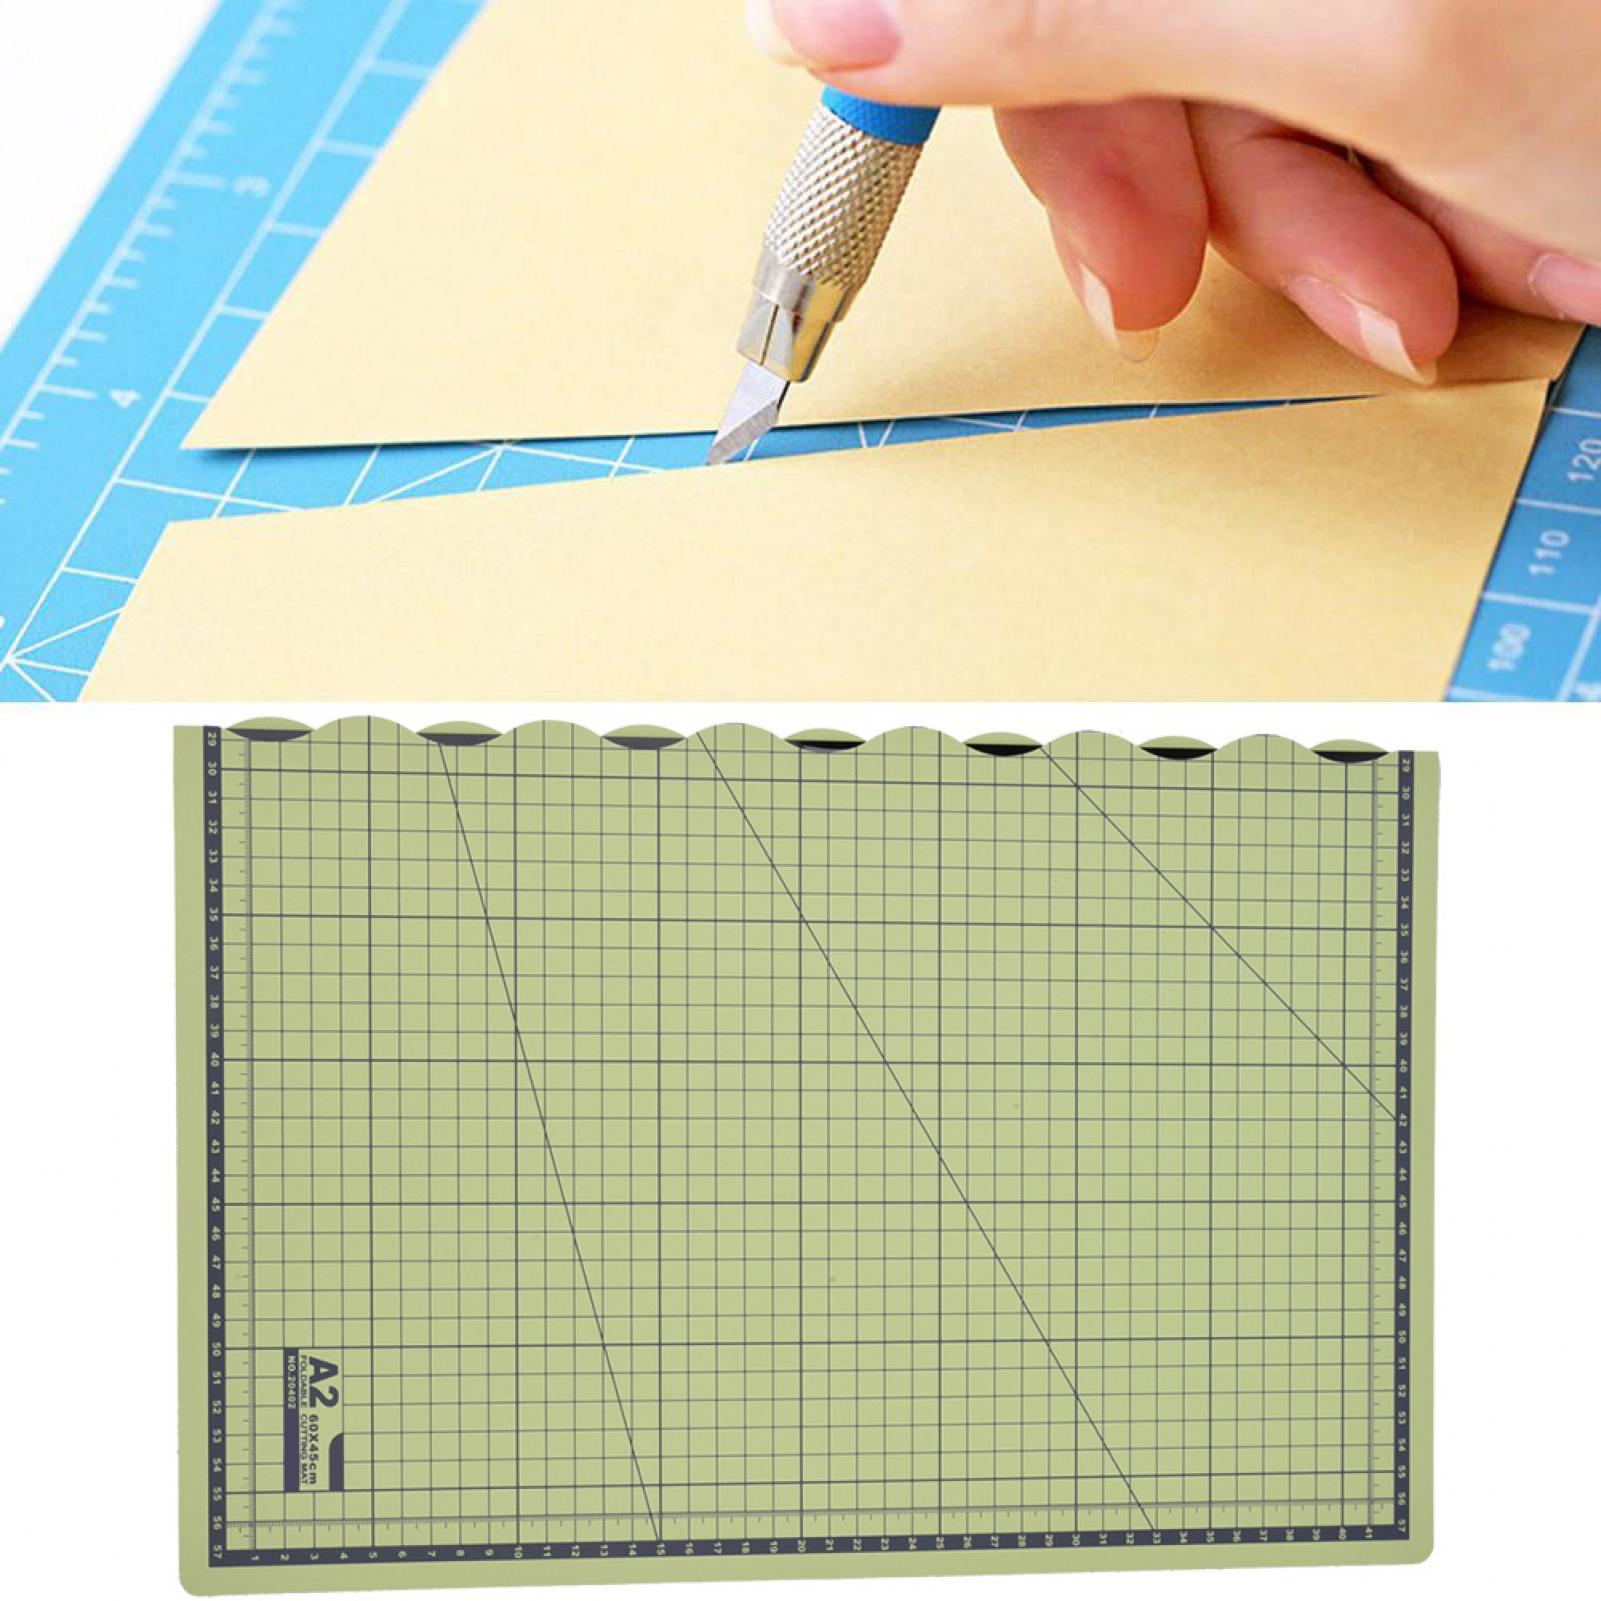 EOTVIA Cutting Mat, Cutting Board Safety With Non-slip Design For Art  Projects At School Or Home For Cutting Writing Drawing, Engraving Seal,  Handmade Crafts Making 